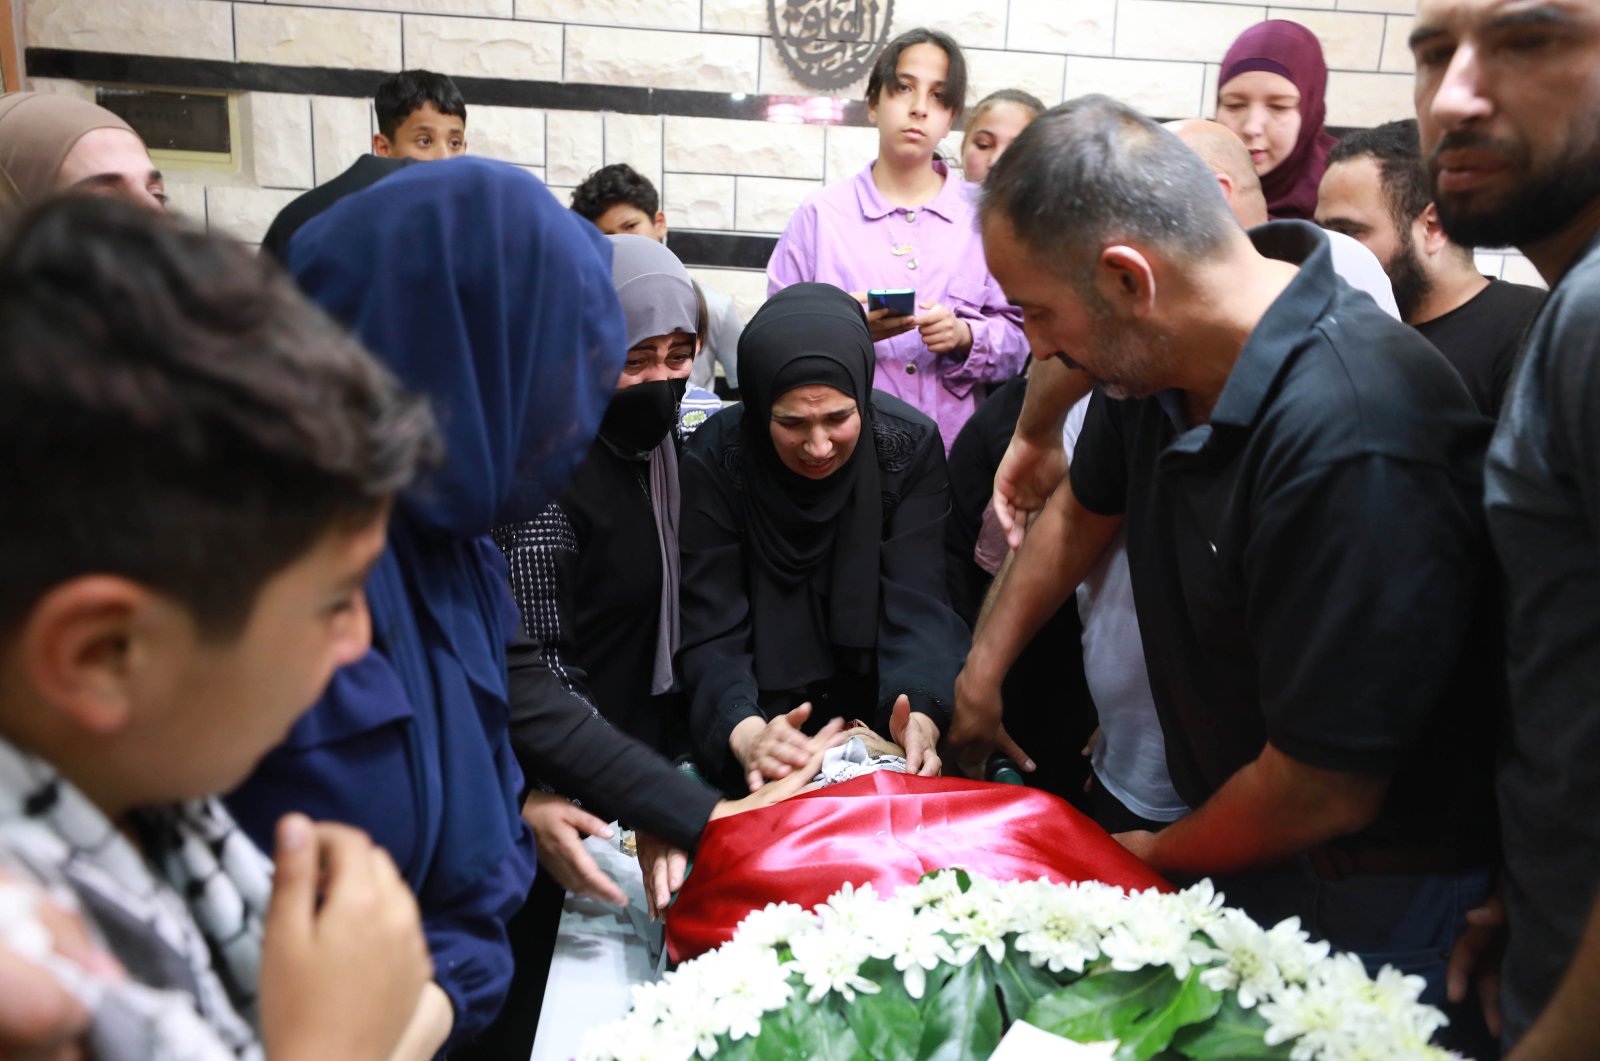 Relatives mourn at the funeral for another Palestinian teen who died as a result of Israeli fire, 16-year-old Mohammed Abdullah Hamid, in the occupied West Bank, Palestine, June 30, 2022. (AA Photo)